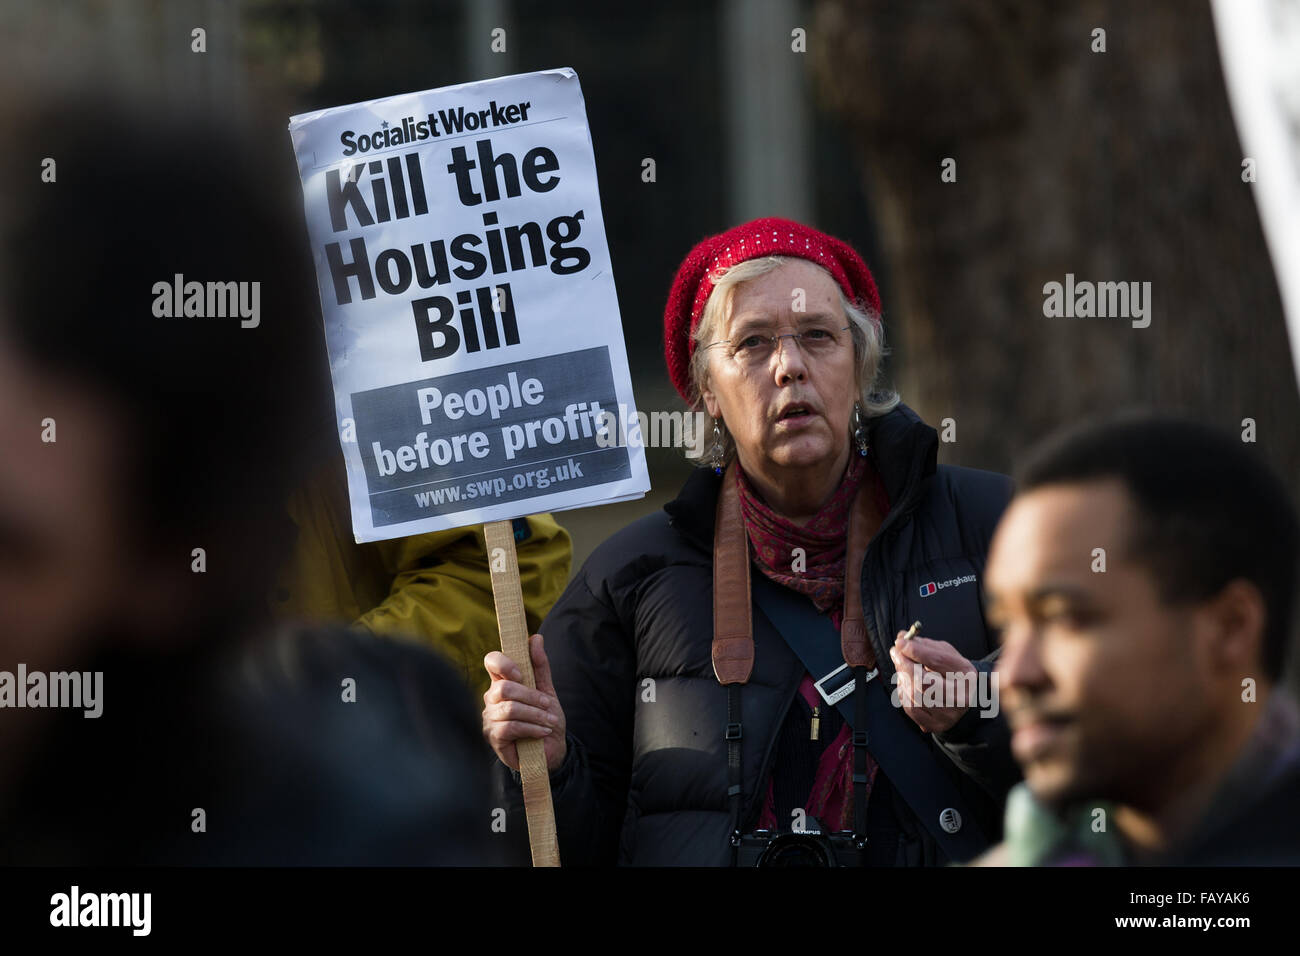 London, UK. 5th January, 2016. Demonstrators from Defend Council Housing (DCH), housing groups, trades unions and Class War protest against the Housing Bill outside the Houses of Parliament in Westminster, London. Members of Parliament (MP’s) are debating the Housing and Planning Bill, which makes provisions about social housing, right to buy, estate agents, rent charges, planning and compulsory purchase. Protesters claim that the Housing Bill, if passed will effectively end council housing. Stock Photo